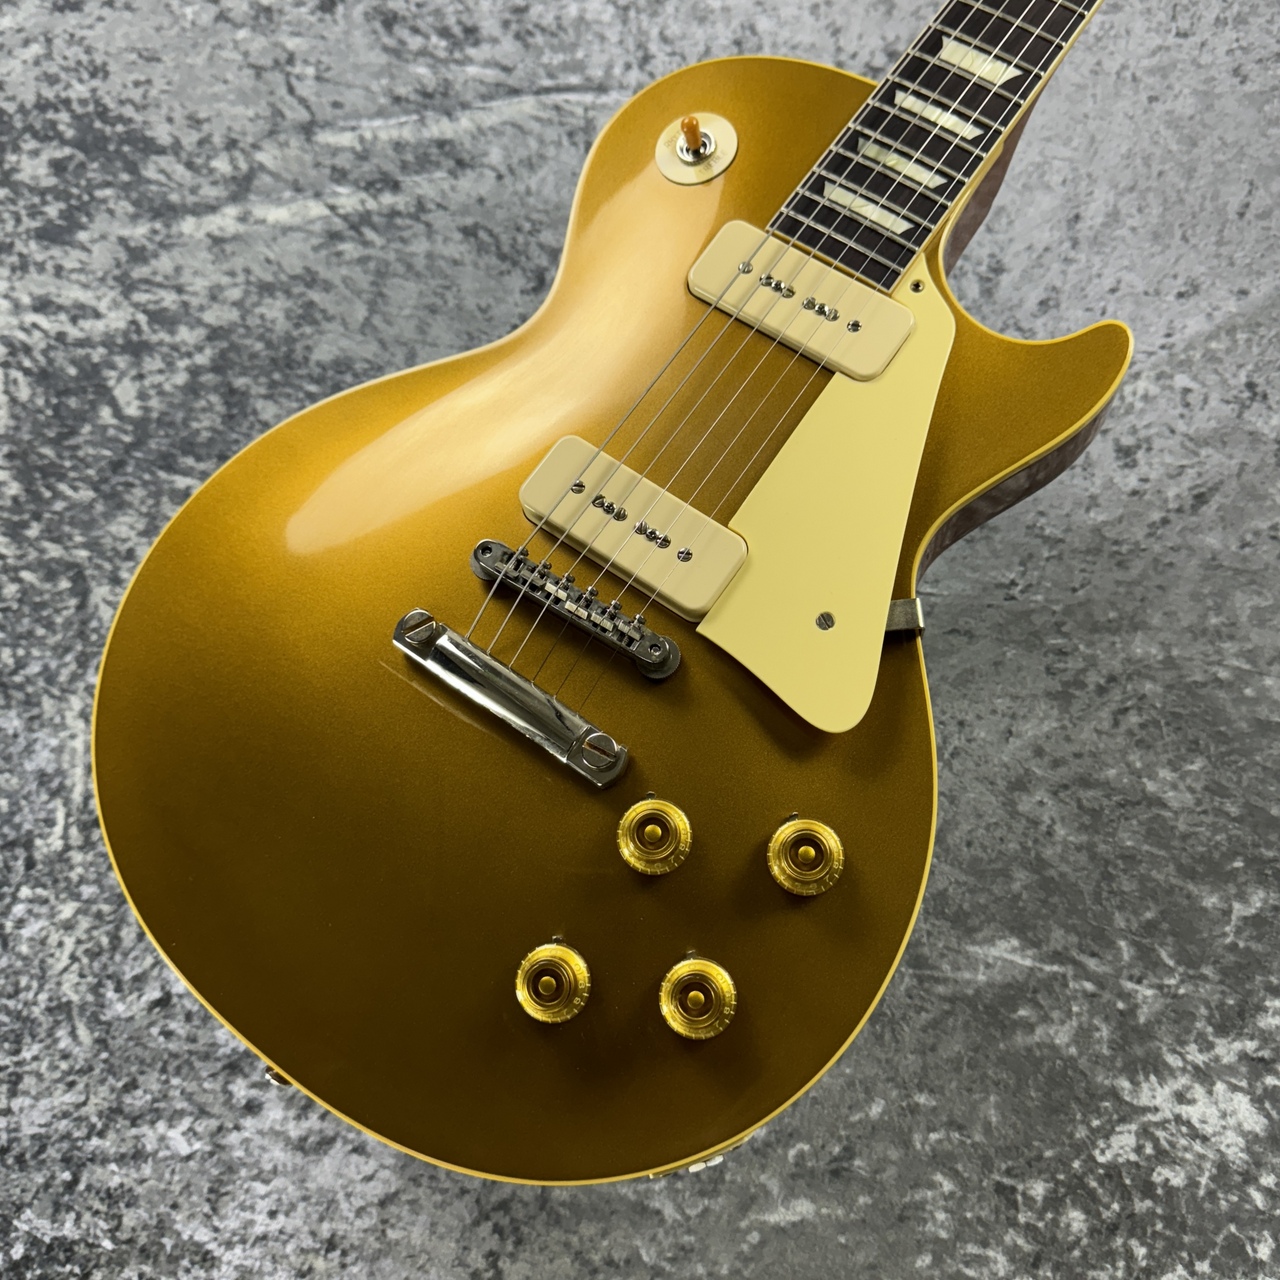 Gibson Custom Shop 【ファットネック】Historic Reissue 1956 Les Paul Gold Top VOS  ~Double Gold~ s/n 6 4110【4.21kg】（新品）【楽器検索デジマート】